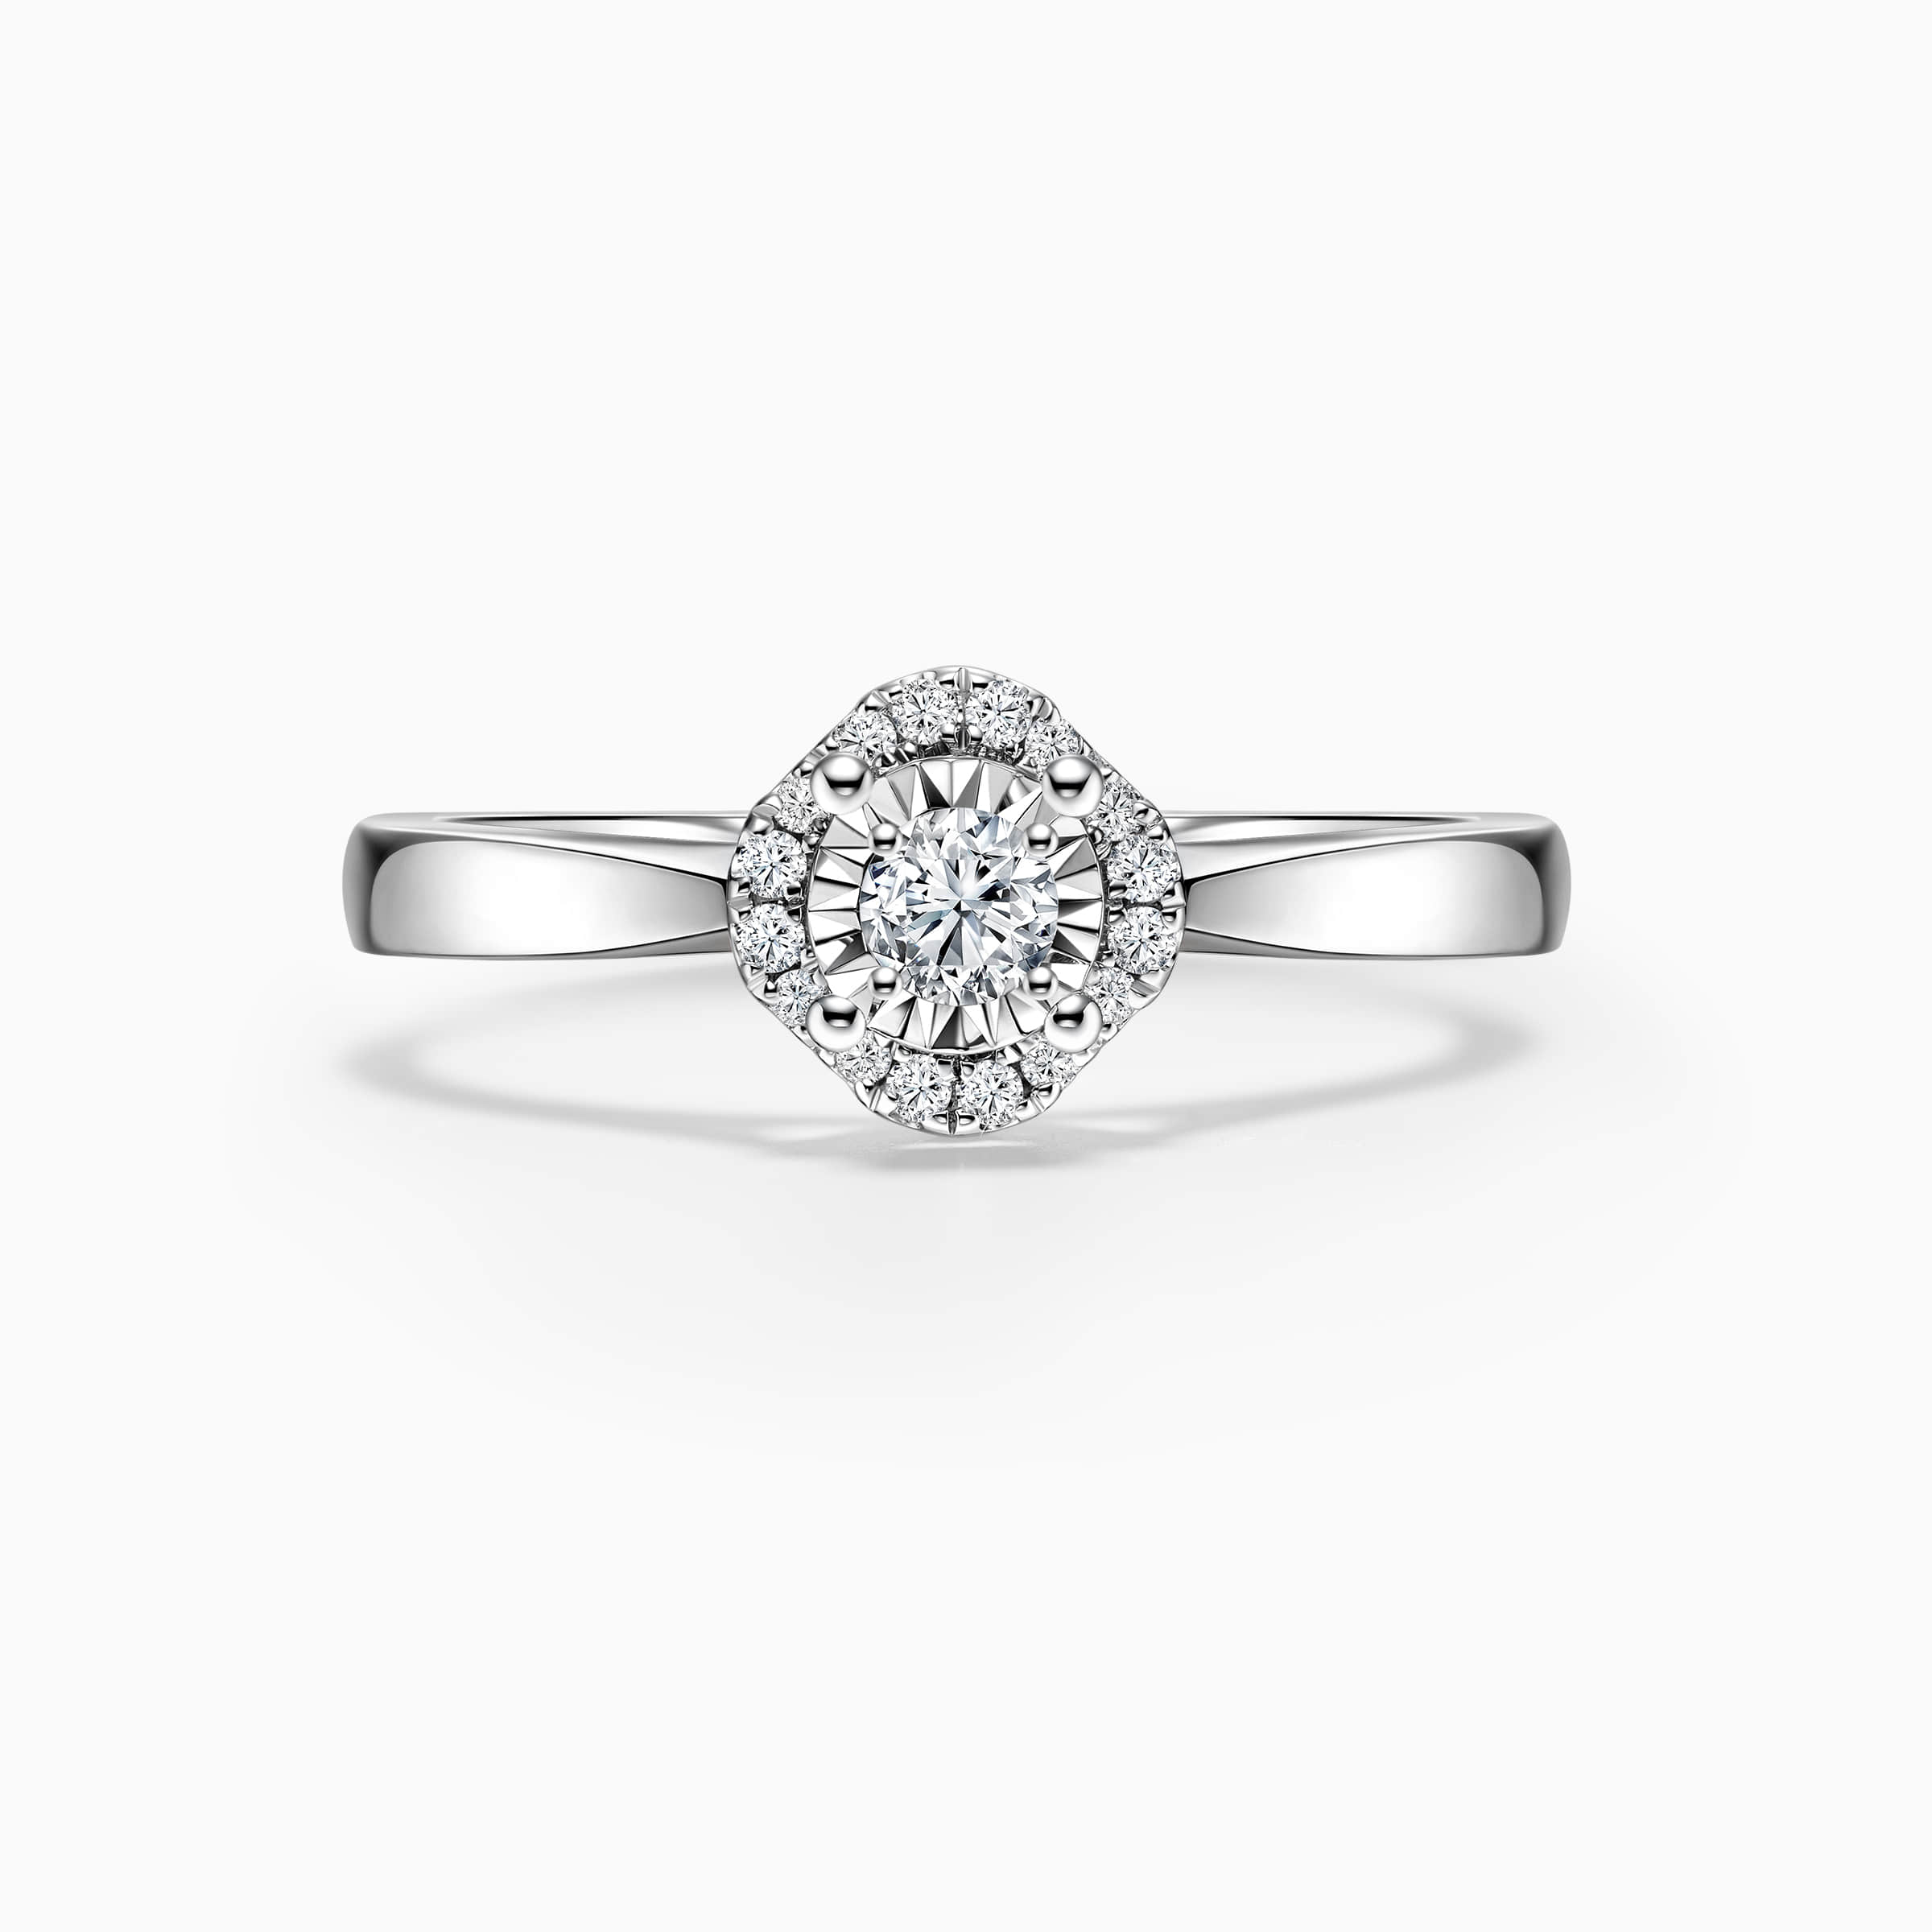 Darry Ring halo diamond promise ring front view